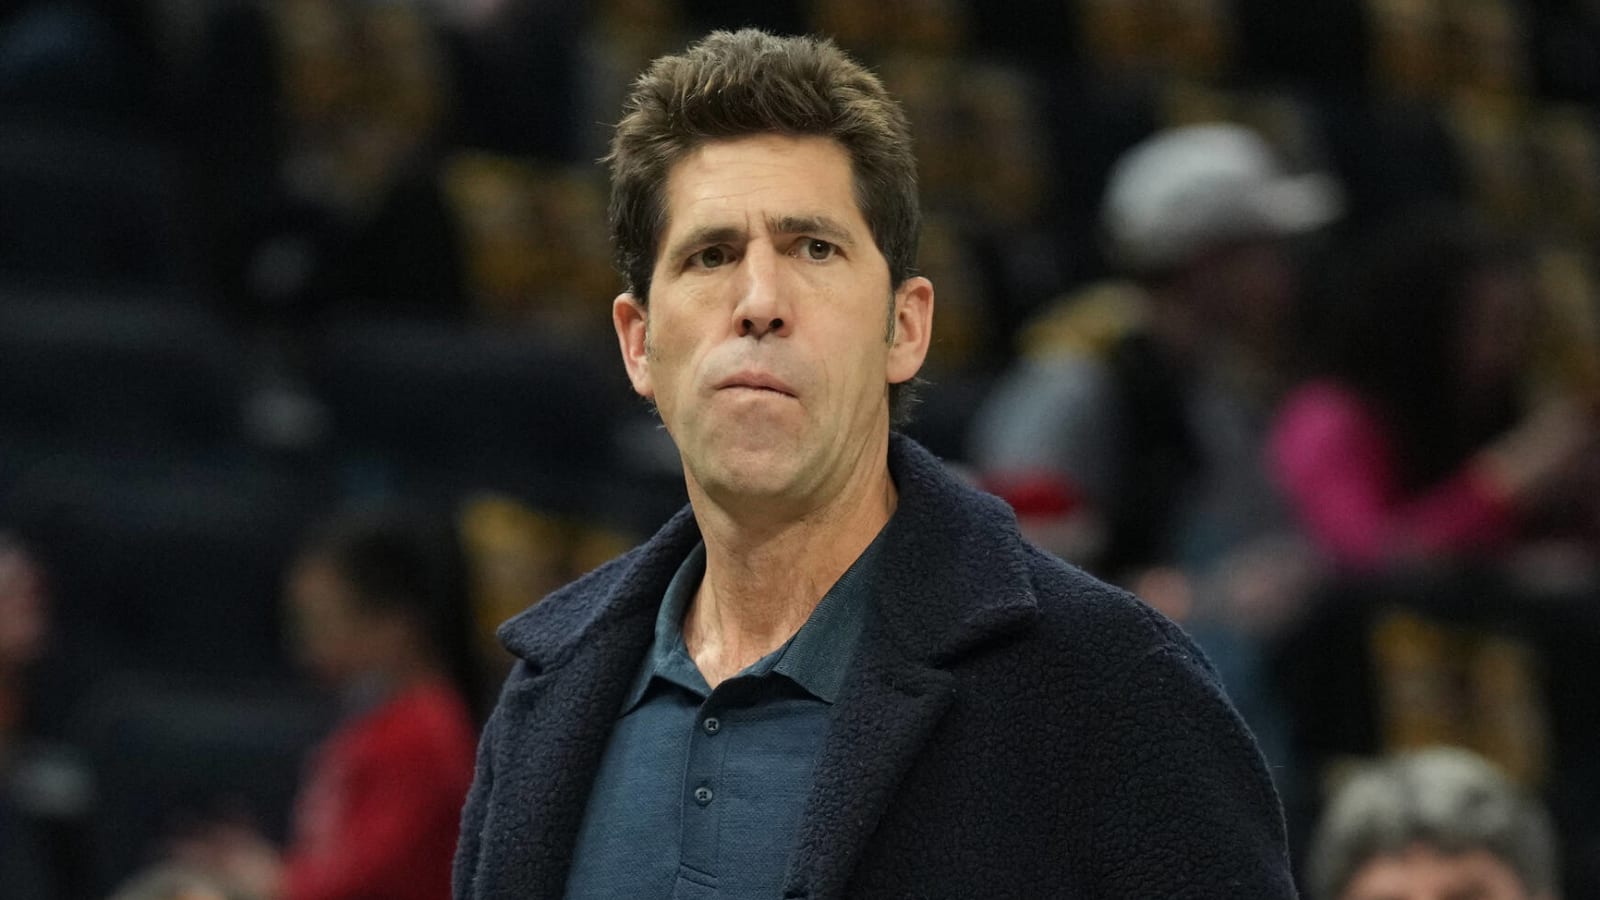 Ex-Warriors GM Bob Myers hired by NFL team